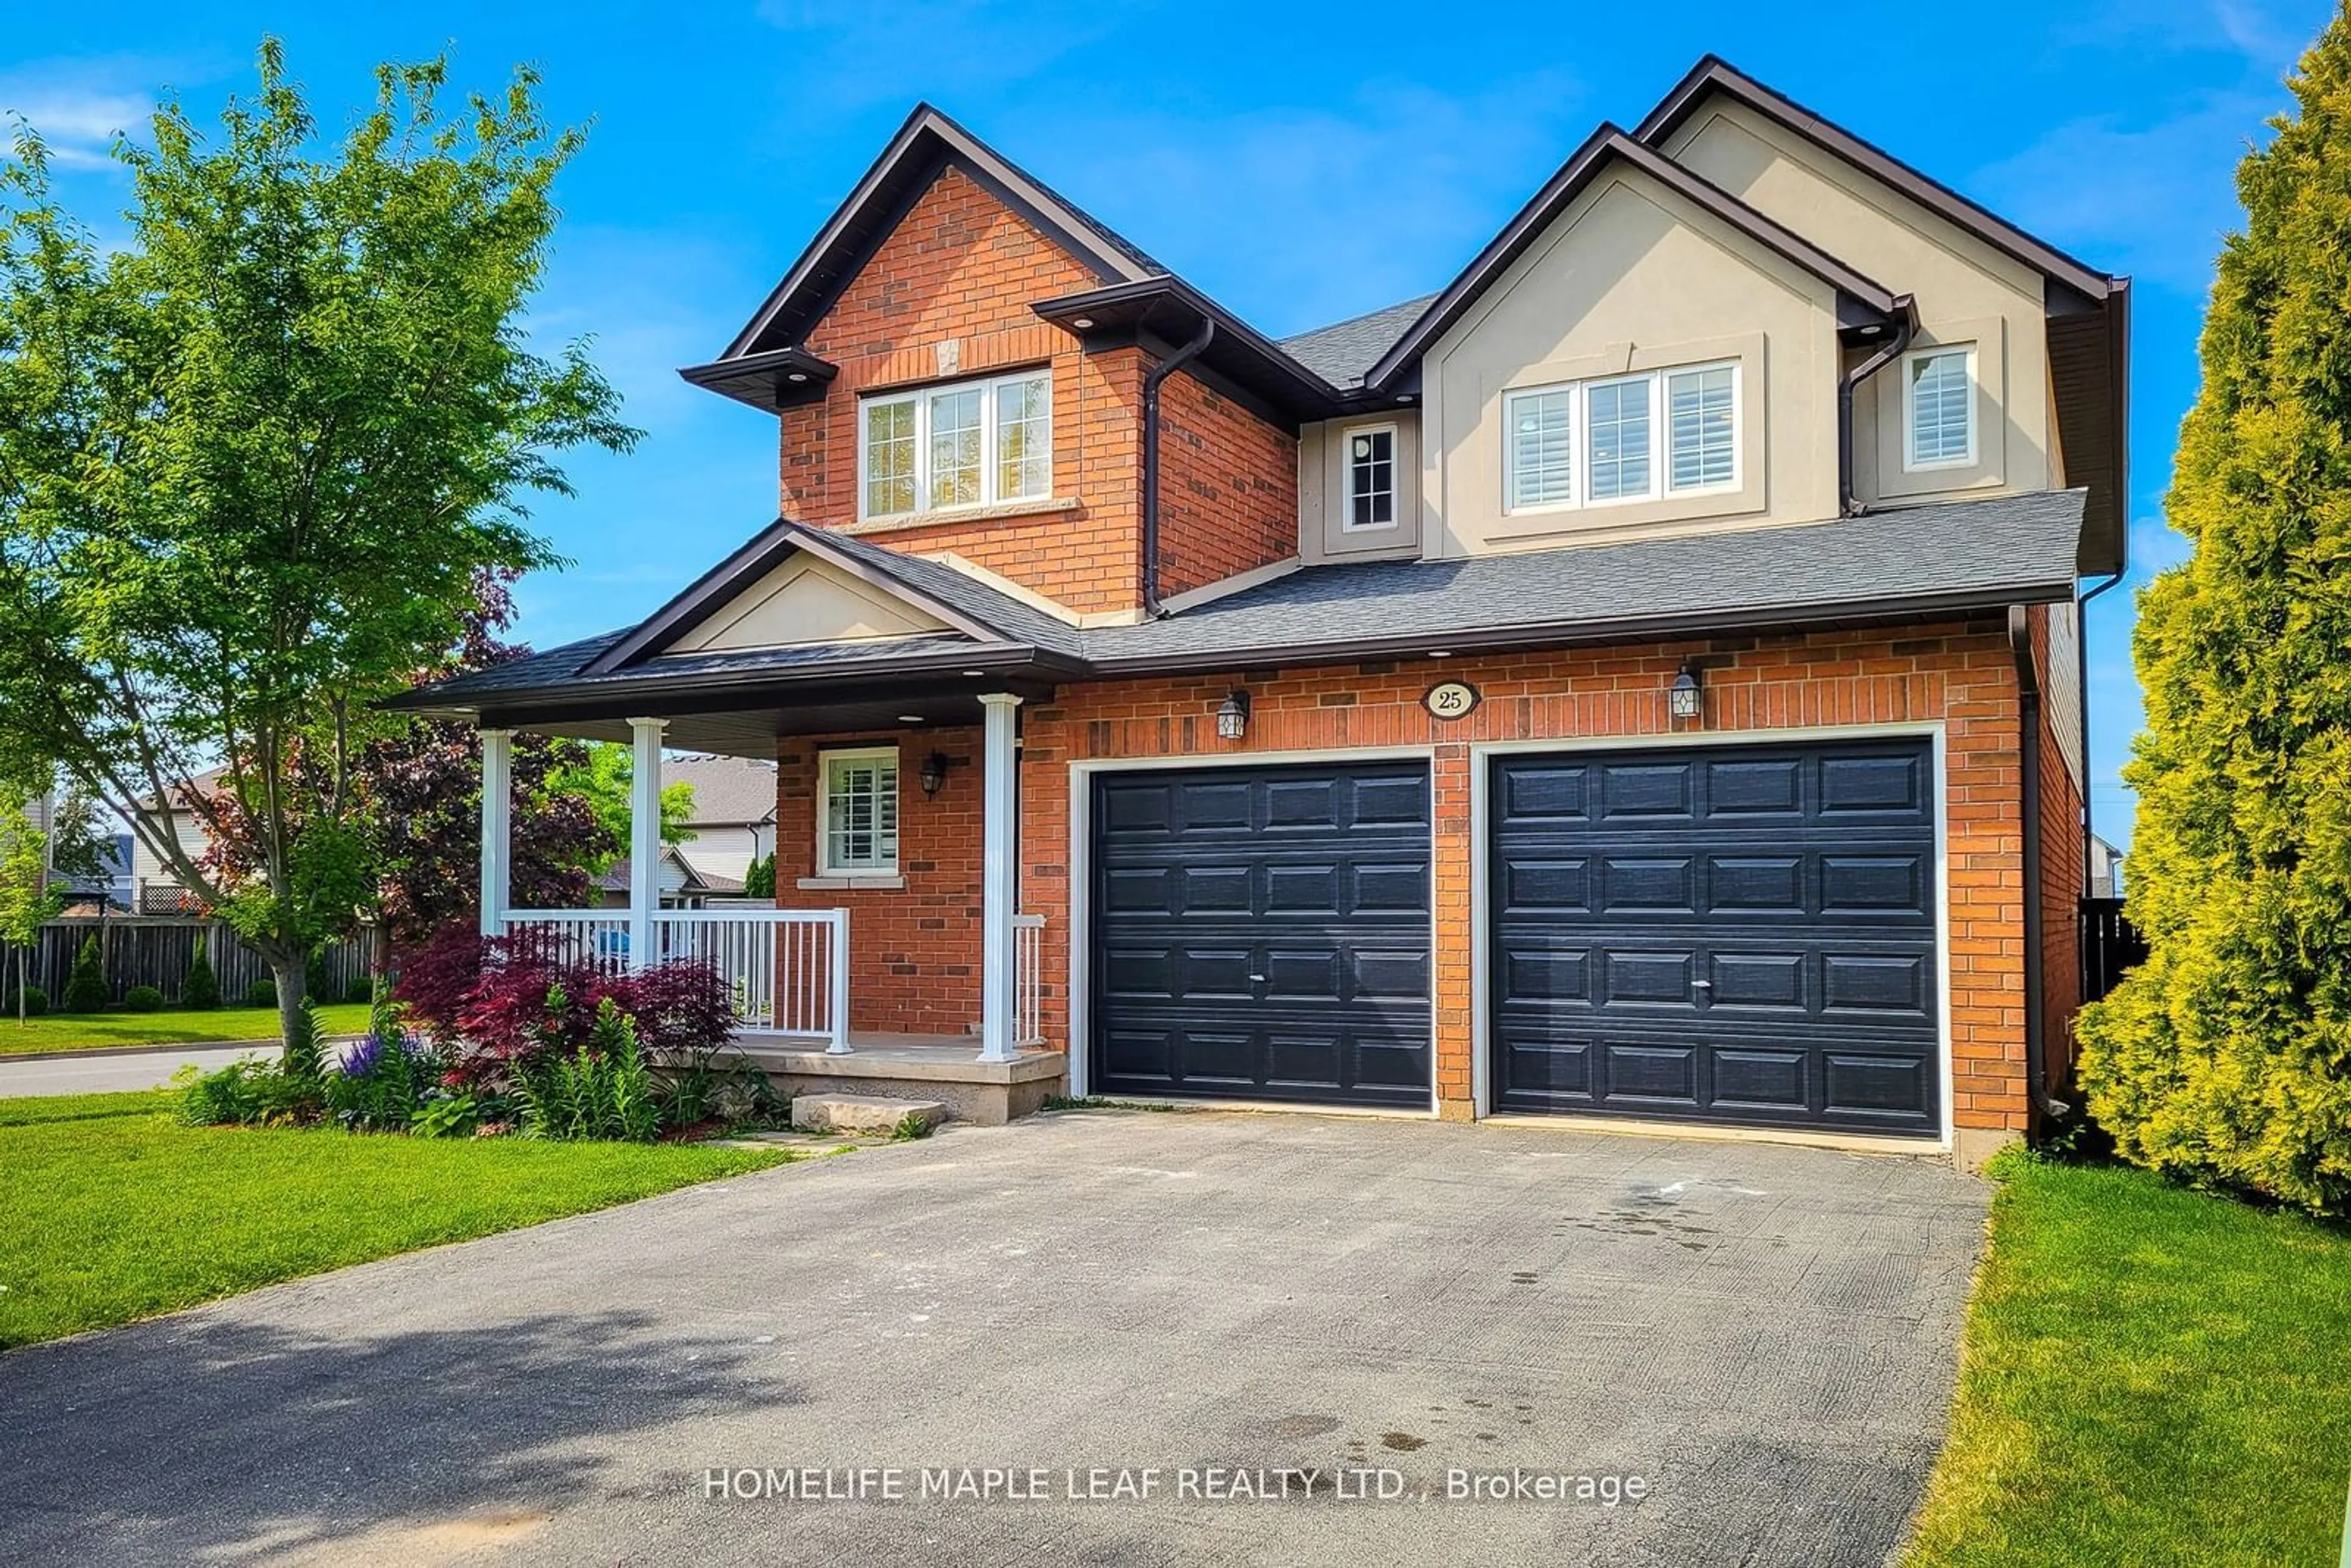 Home with brick exterior material for 25 Vinifera Dr, Grimsby Ontario L3M 5R8